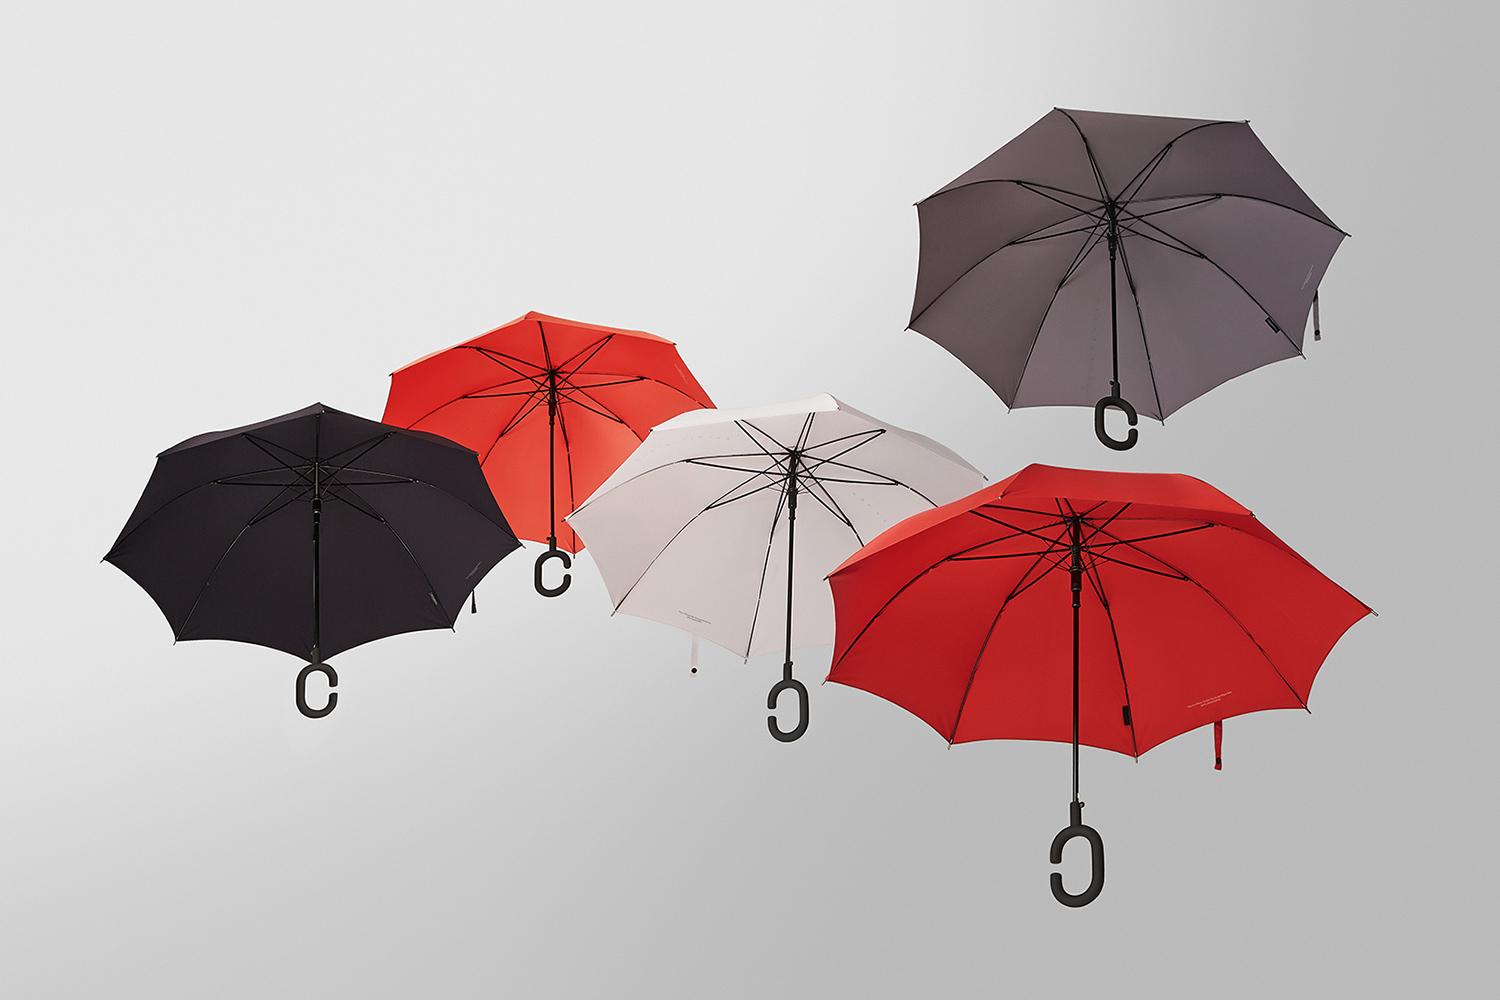 the phone brella allows you to text whatever is really not that important in rain kt designs 5